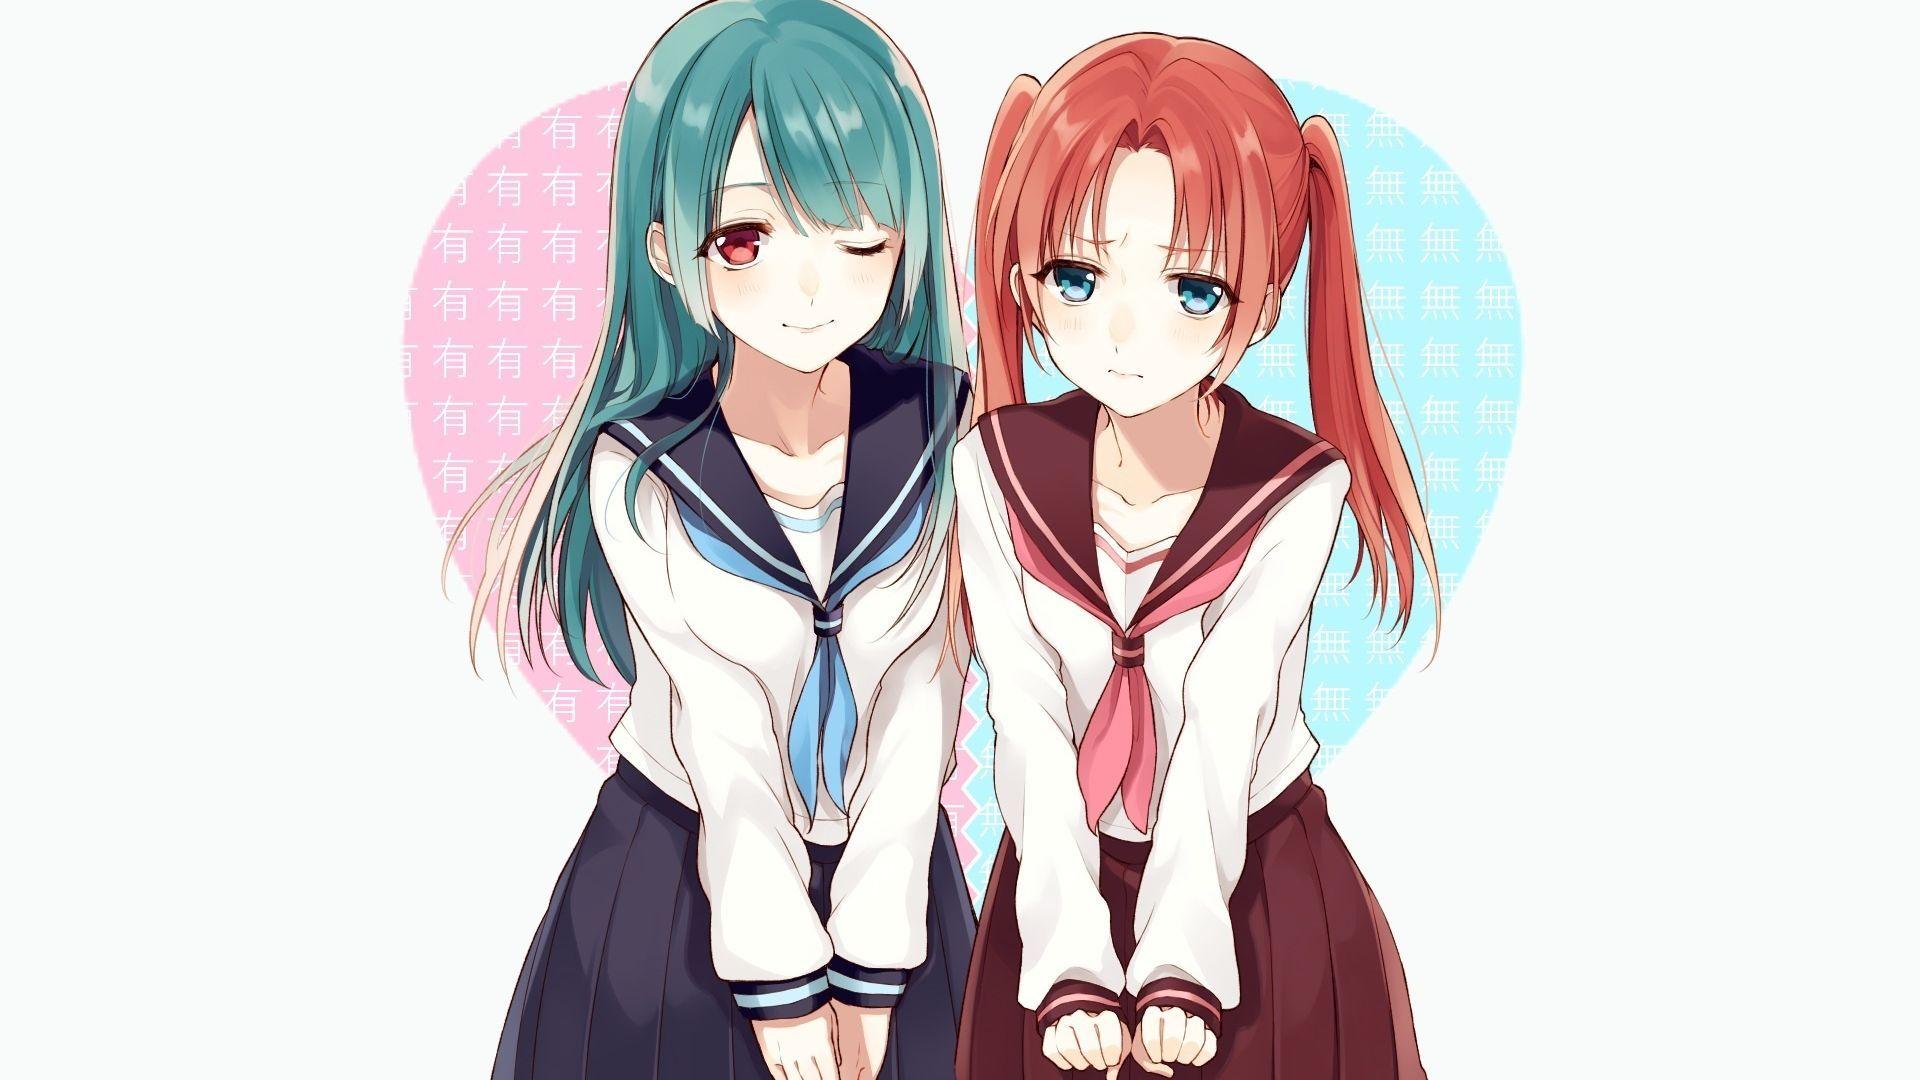 Best Friend Anime Wallpapers - Top Free Best Friend Anime Backgrounds